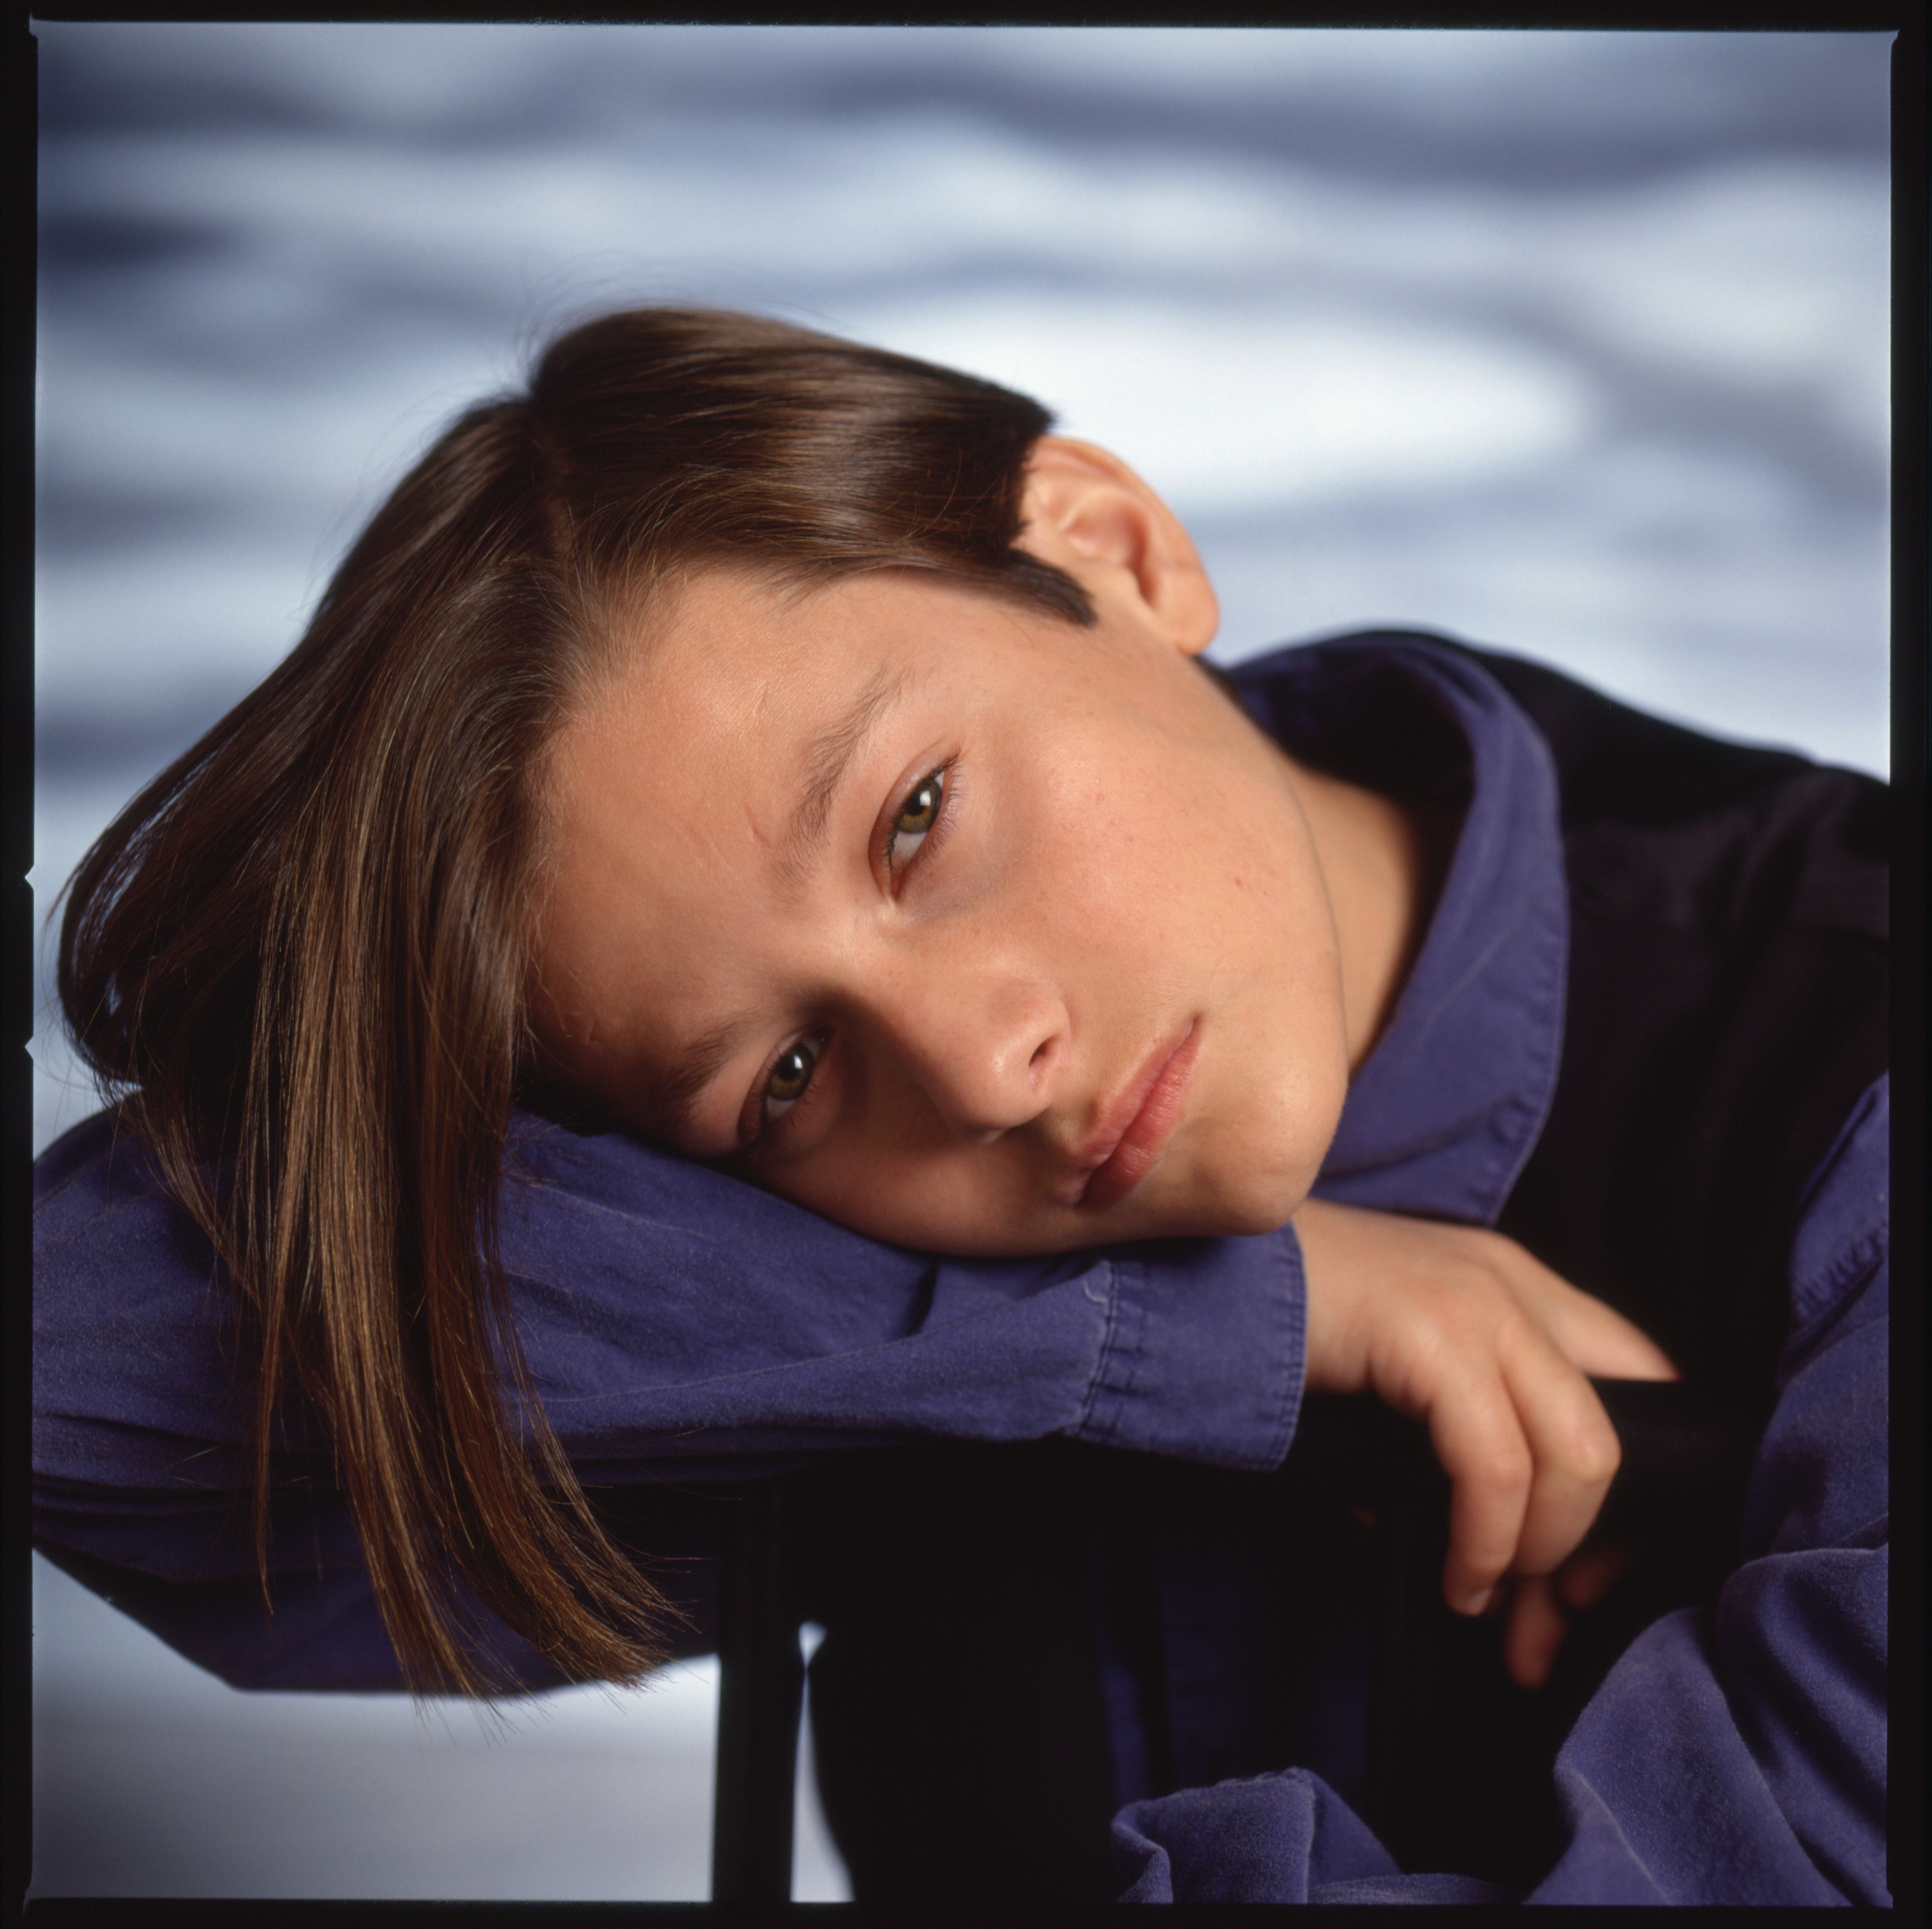 Edward Furlong in 1991 in Los Angeles, California | Source: Getty Images